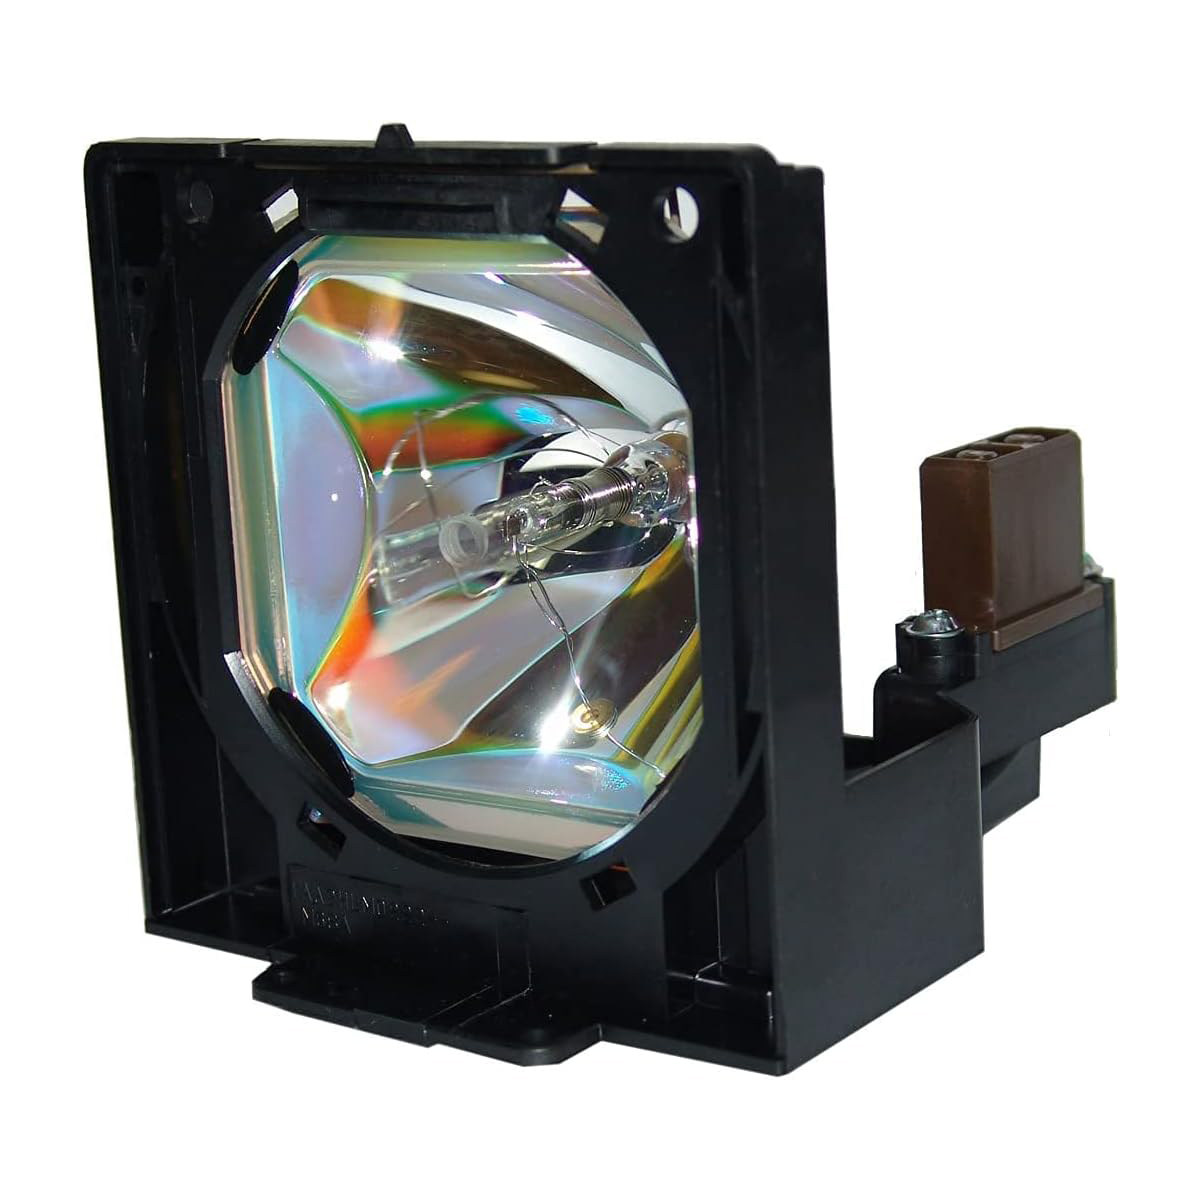 Replacement Projector lamp LV-LP02/2012A001AA For CANON LV-5500/LV-7500